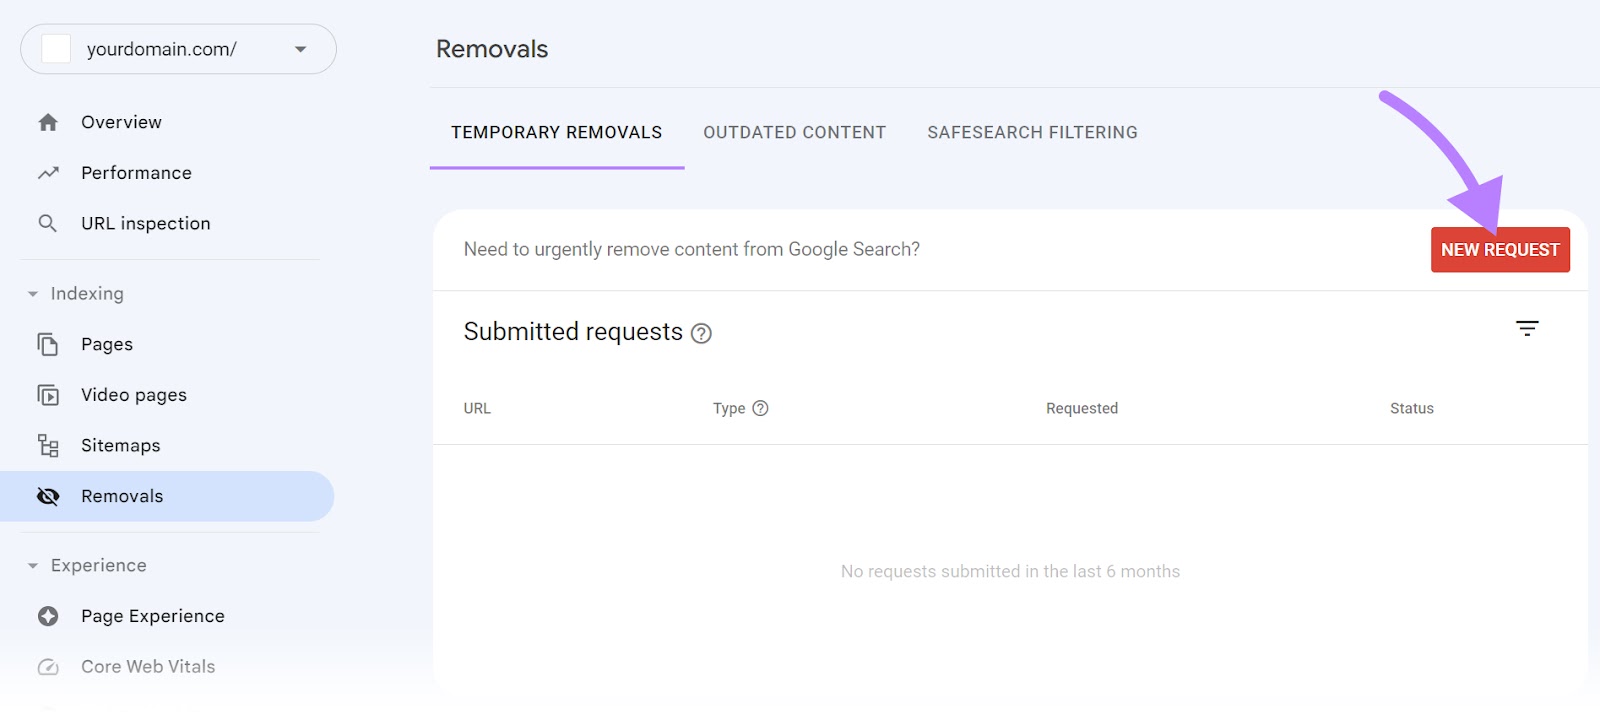 "New Request” button highlighted on the "Removals" page